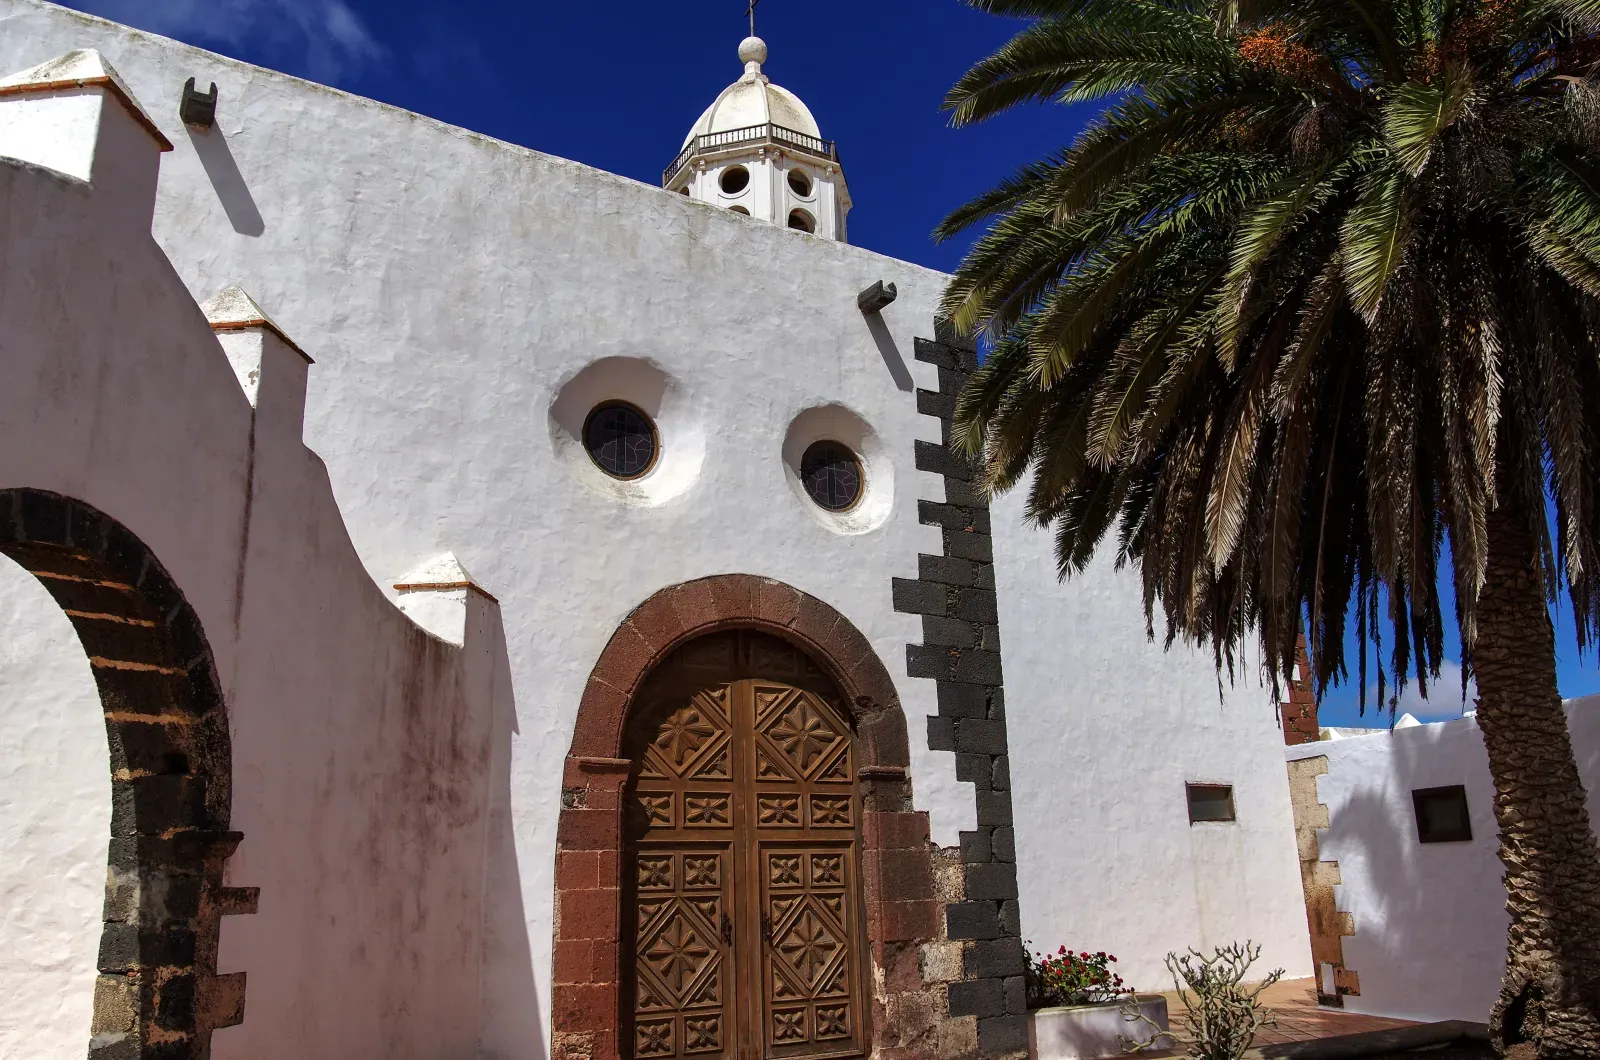 Teguise in Lanzarote, Canary Islands